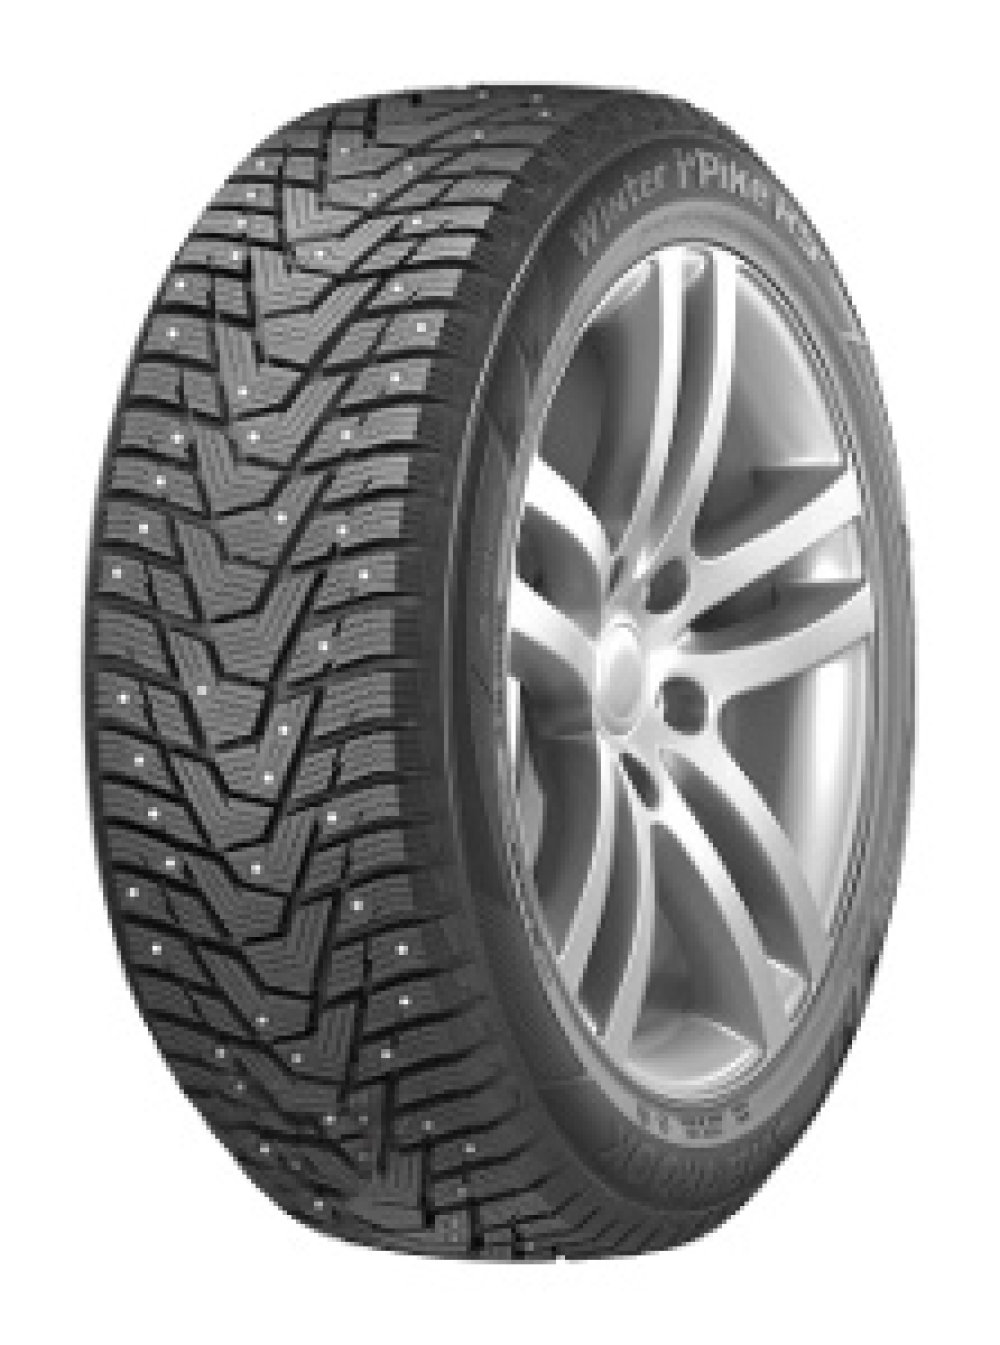 Image of        Hankook Winter I*Pike RS2 W429 ( 245/45 R17 99T XL, pneumatico chiodato, SBL )